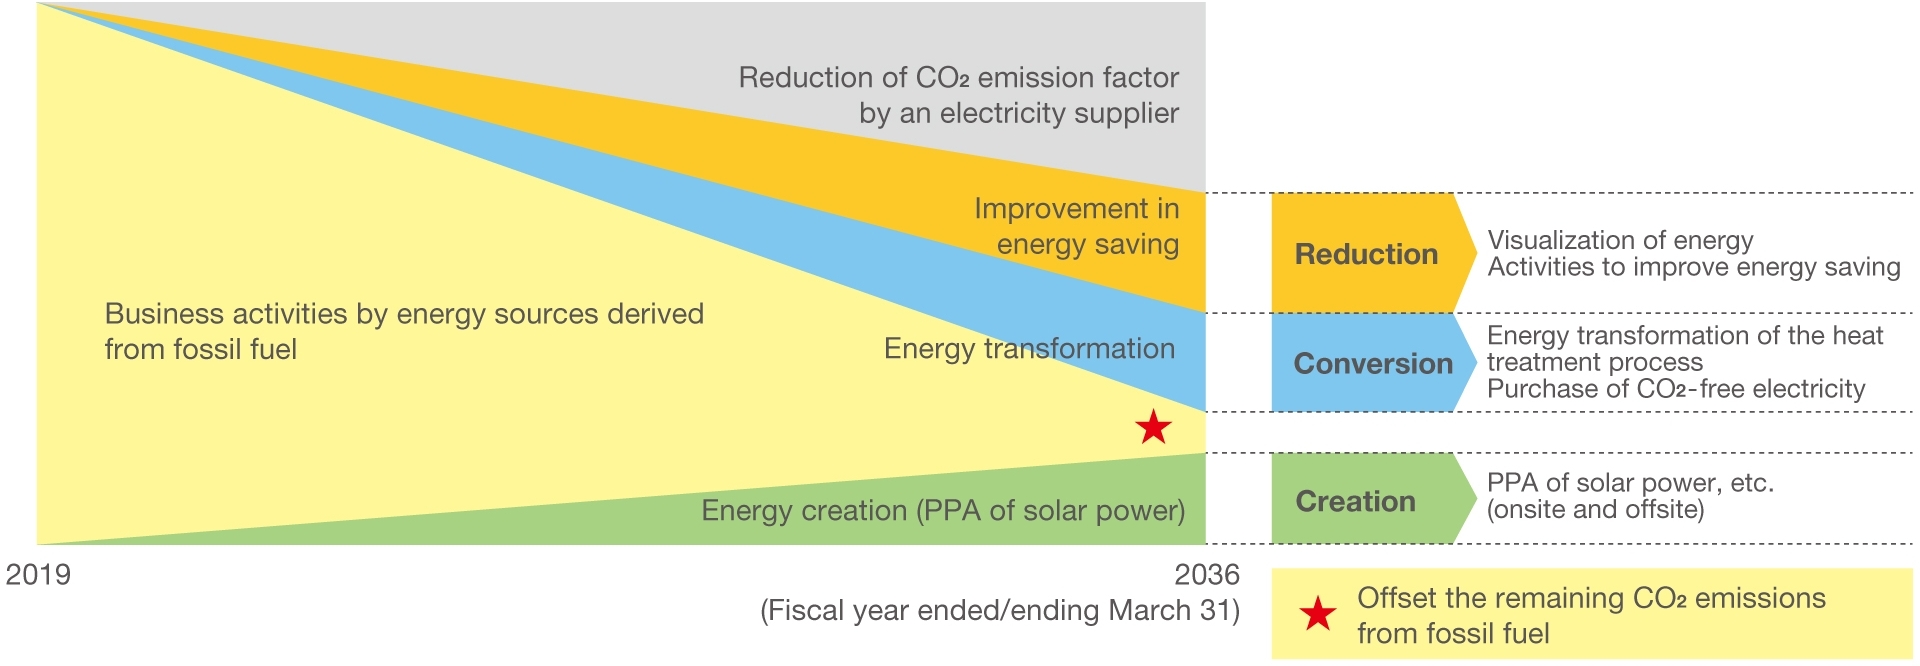 Carbon neutrality realization image